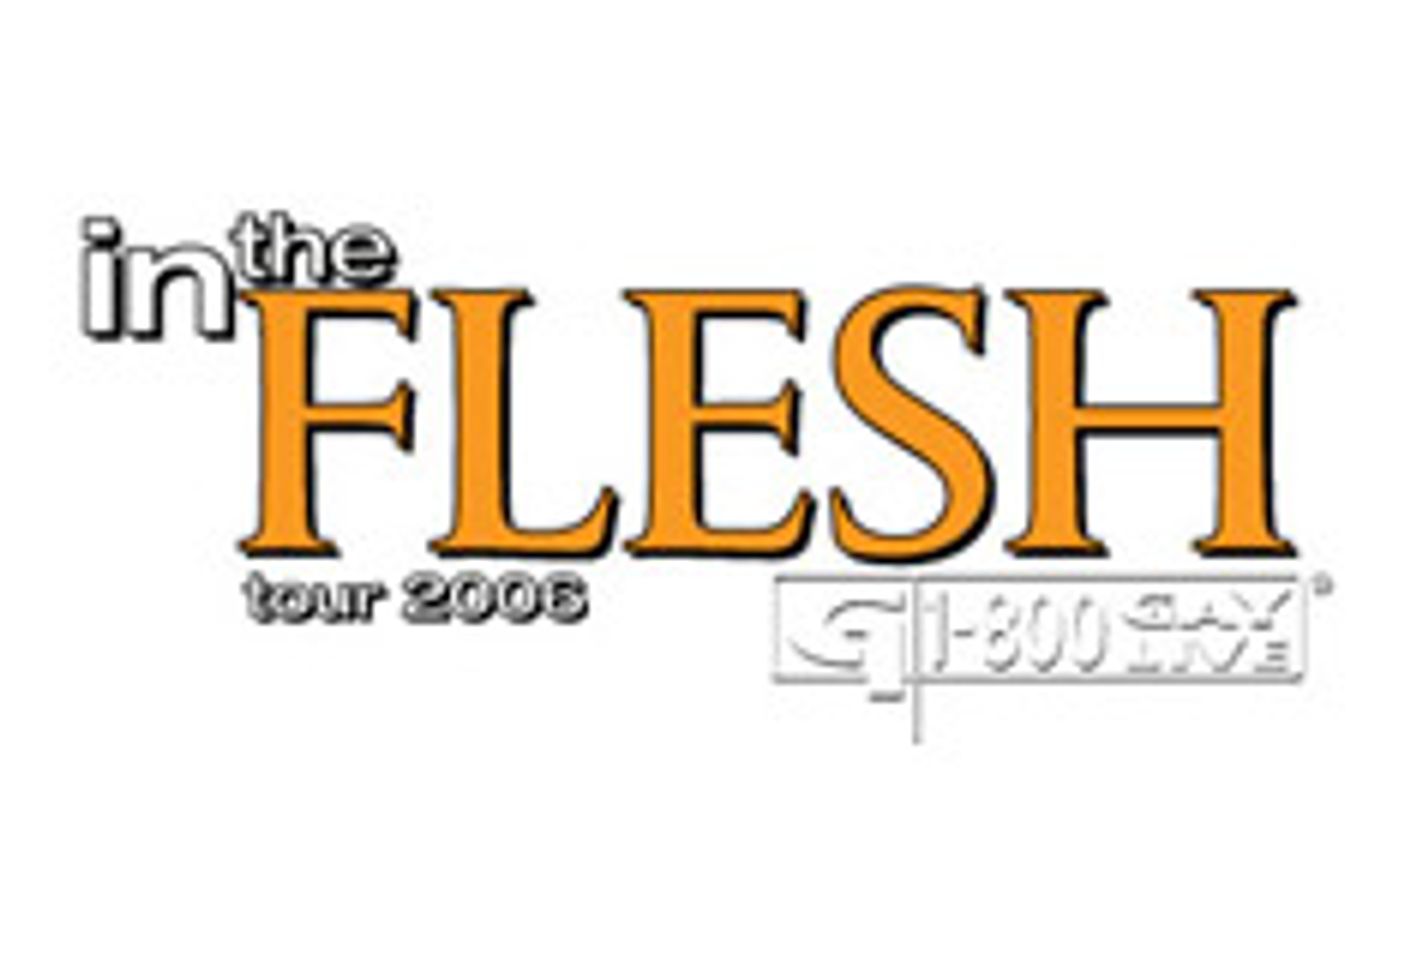 1-800-GAYLIVE "In the Flesh Tour 2006" Dates and Cities